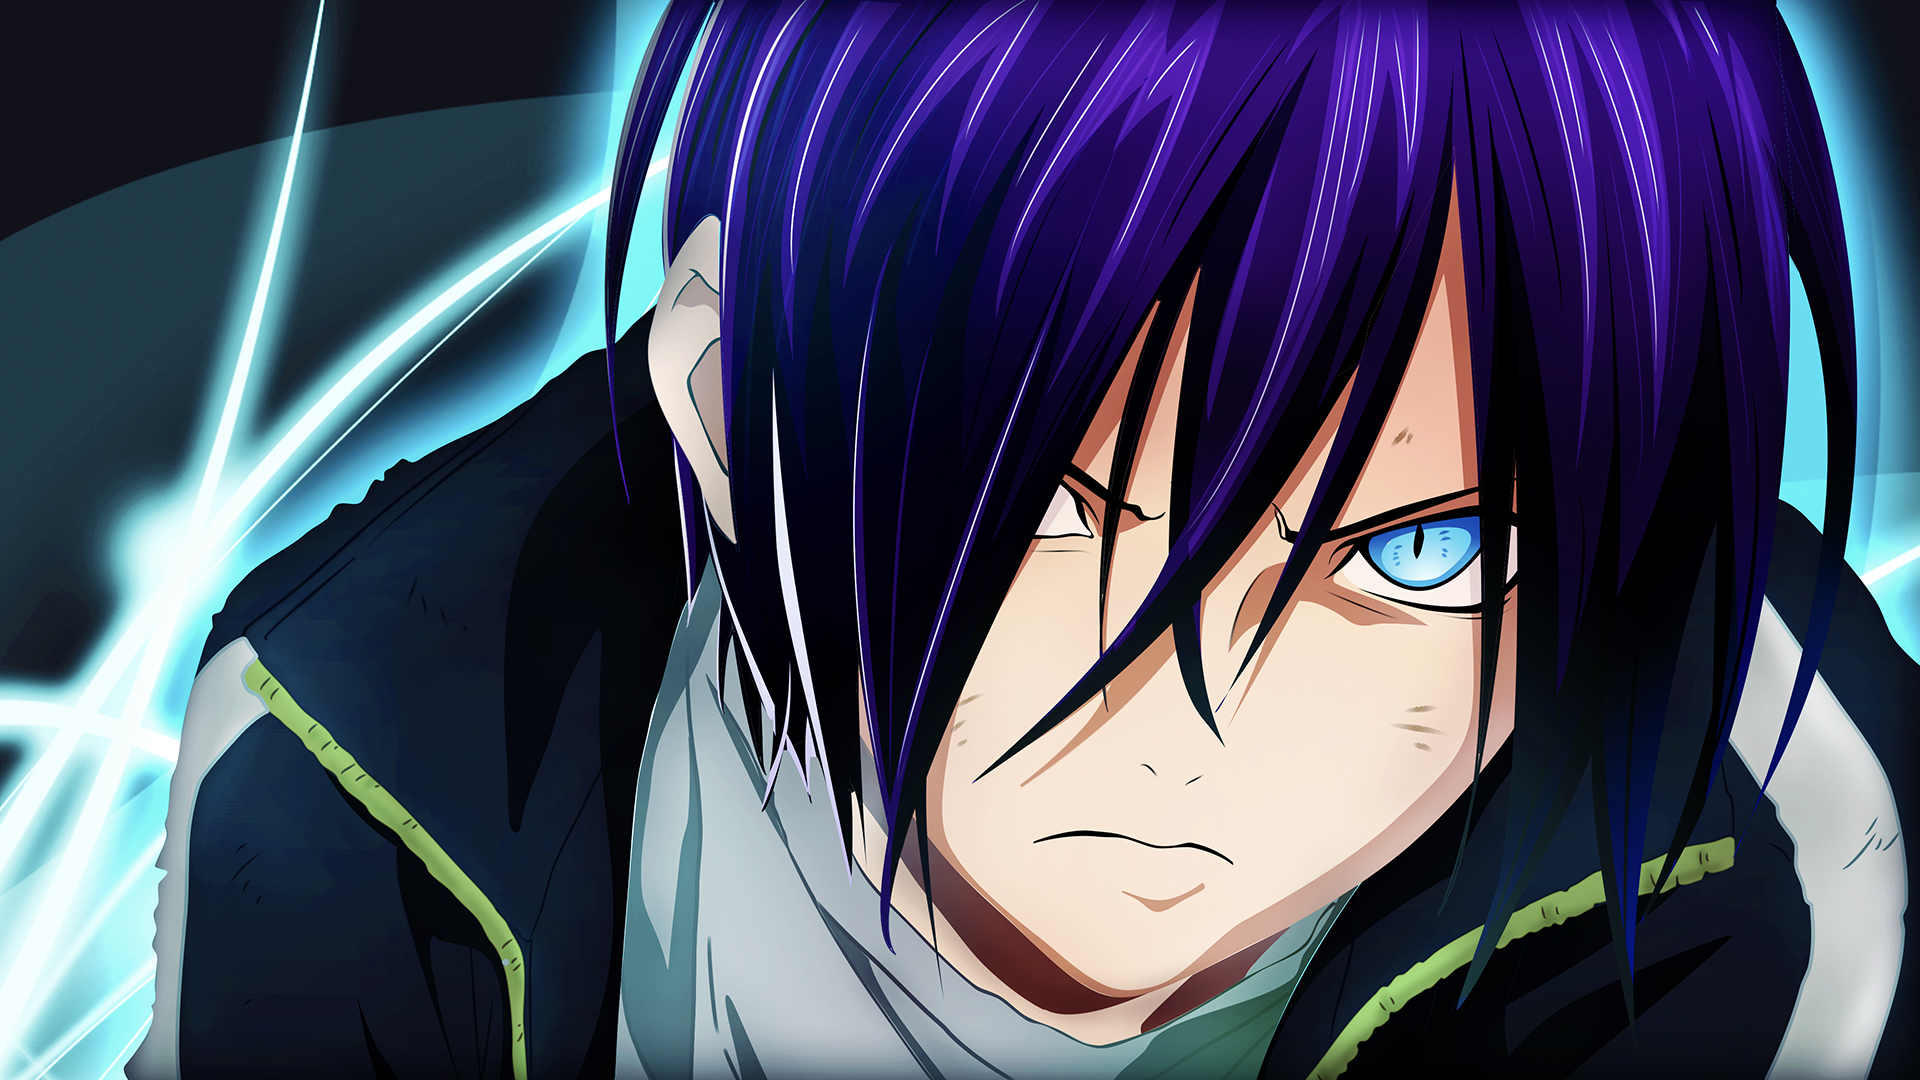 4. Yato from Noragami - wide 7